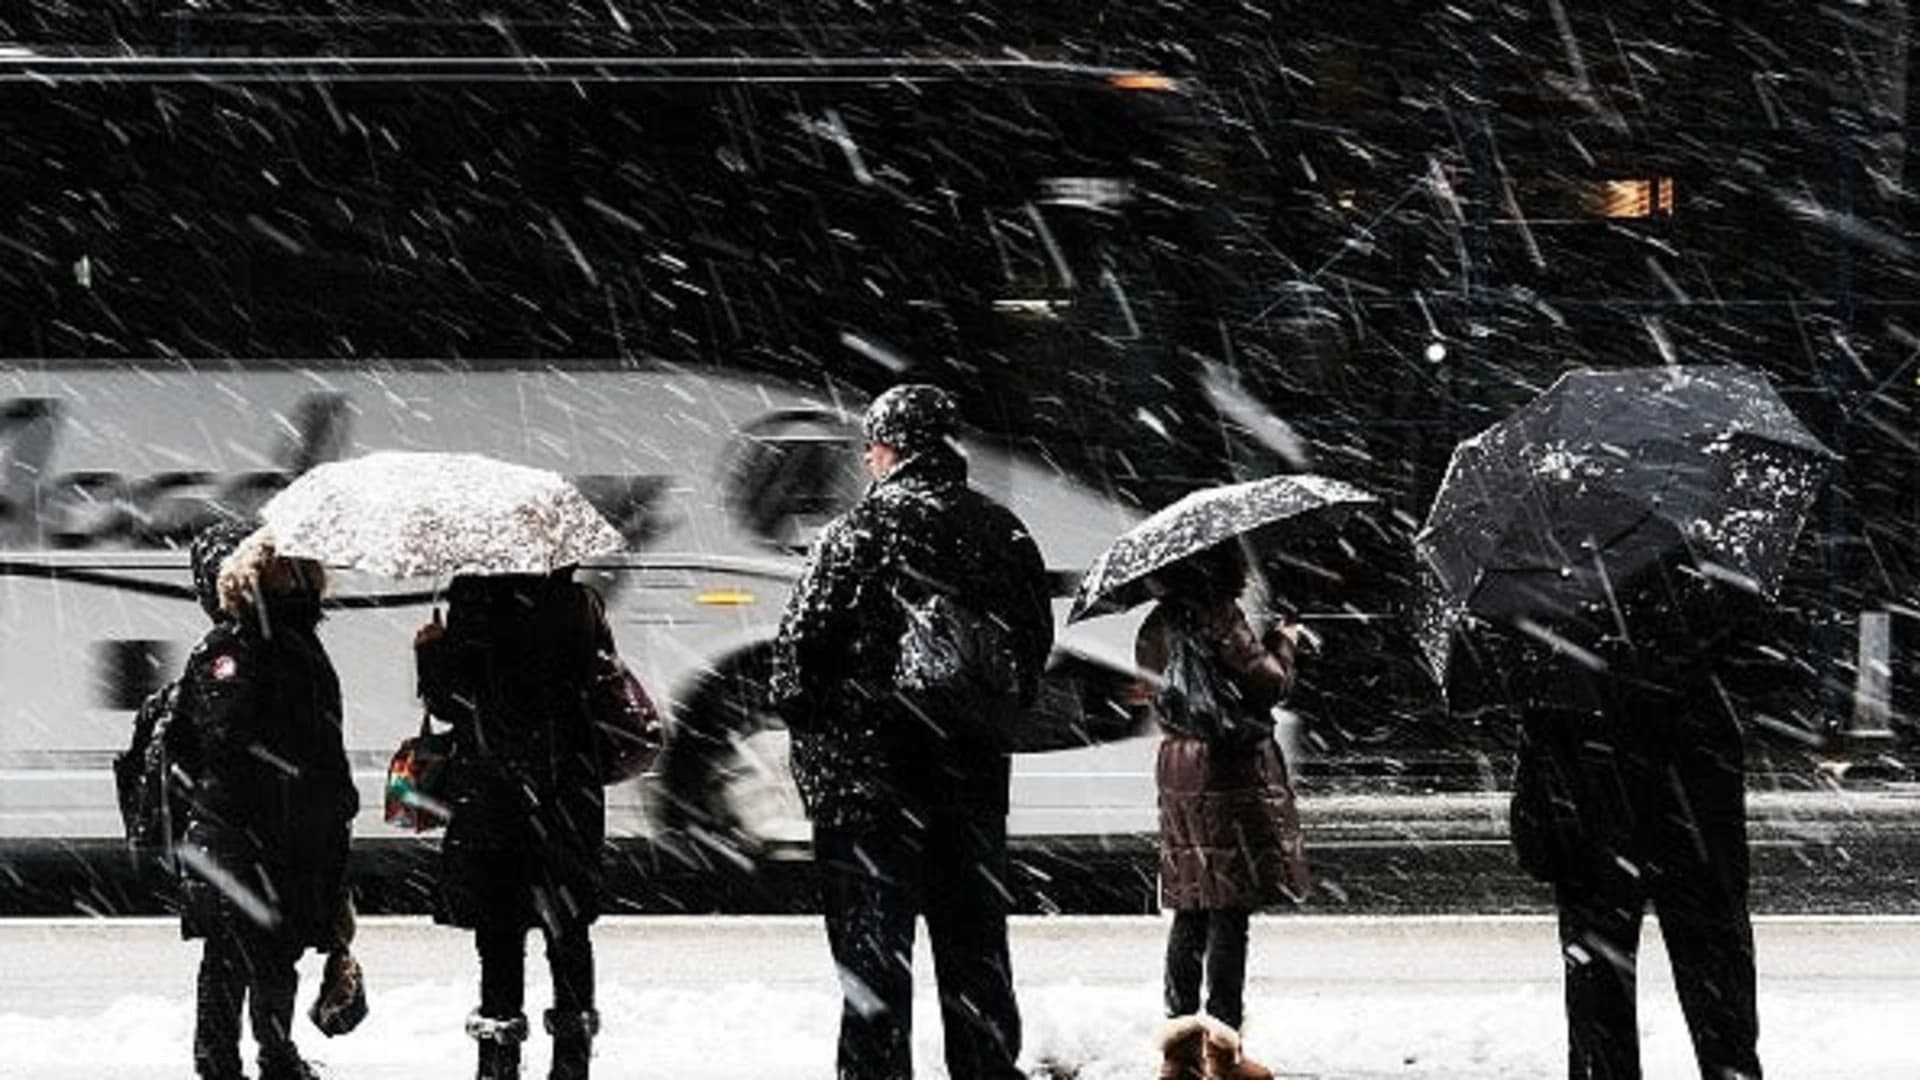 Nor'easter snow totals for New York City